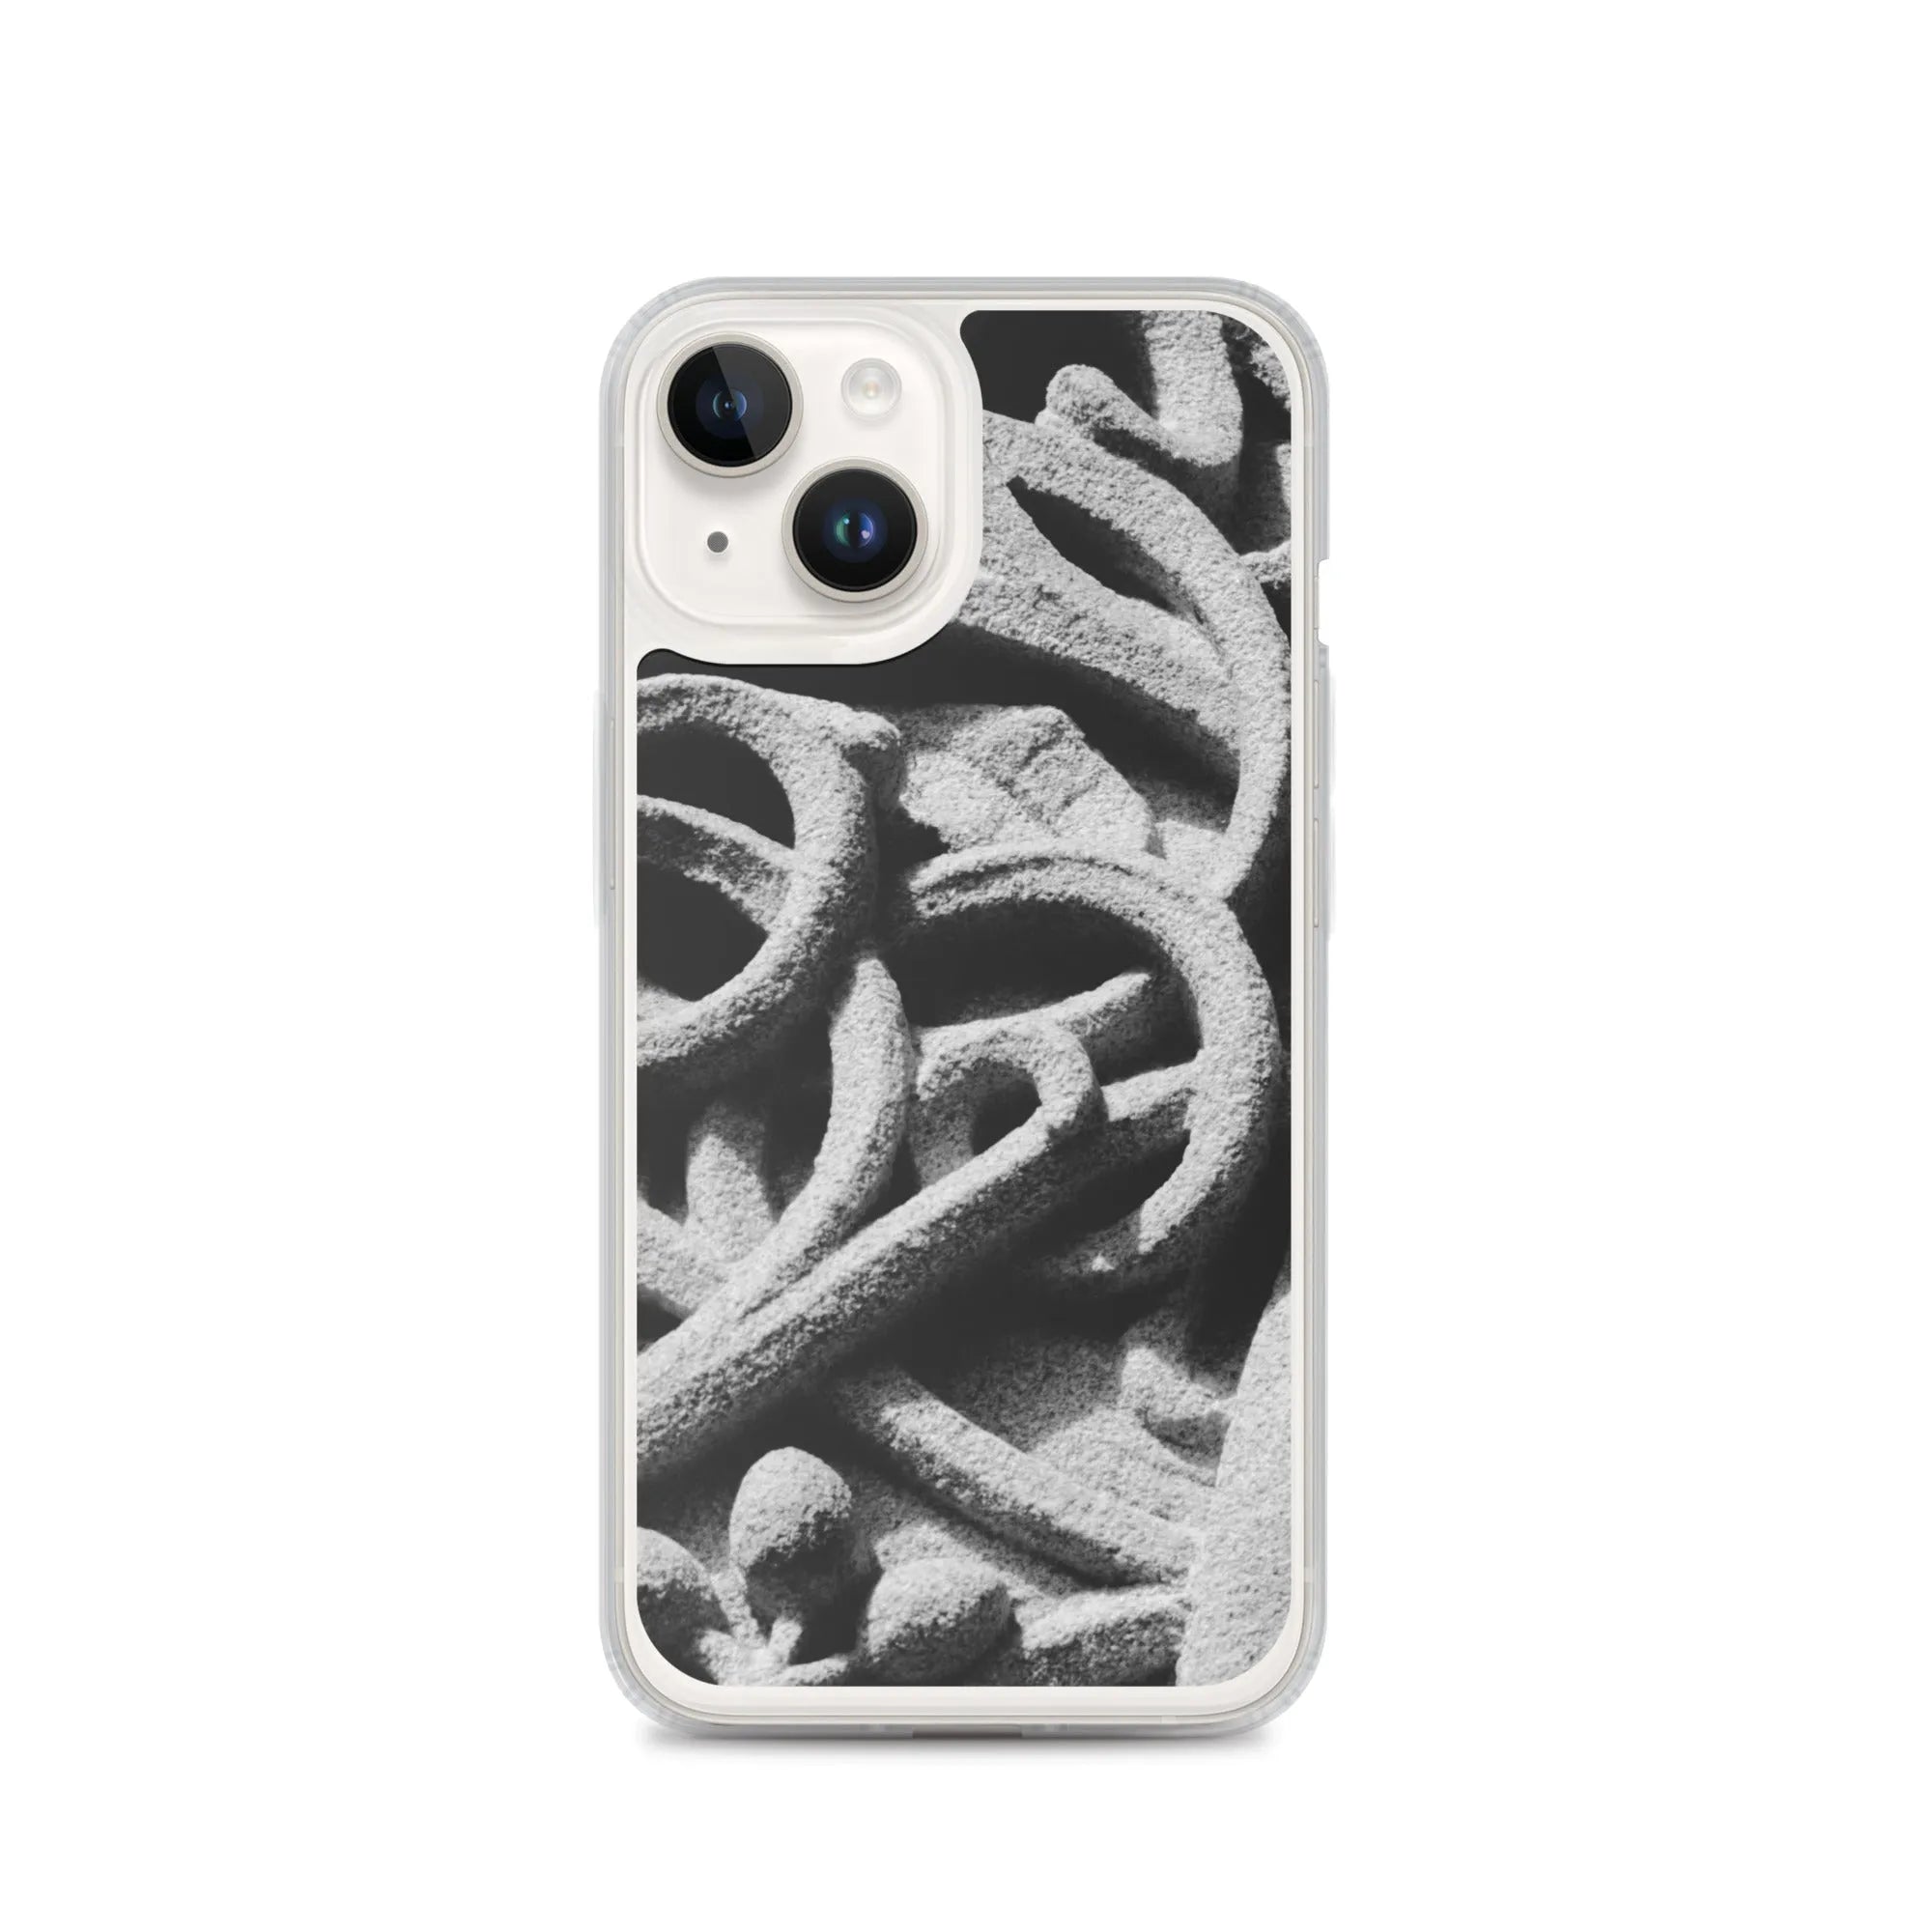 Labyrinth - Designer Travels Art Iphone Case - Black And White - Iphone 14 - Mobile Phone Cases - Aesthetic Art